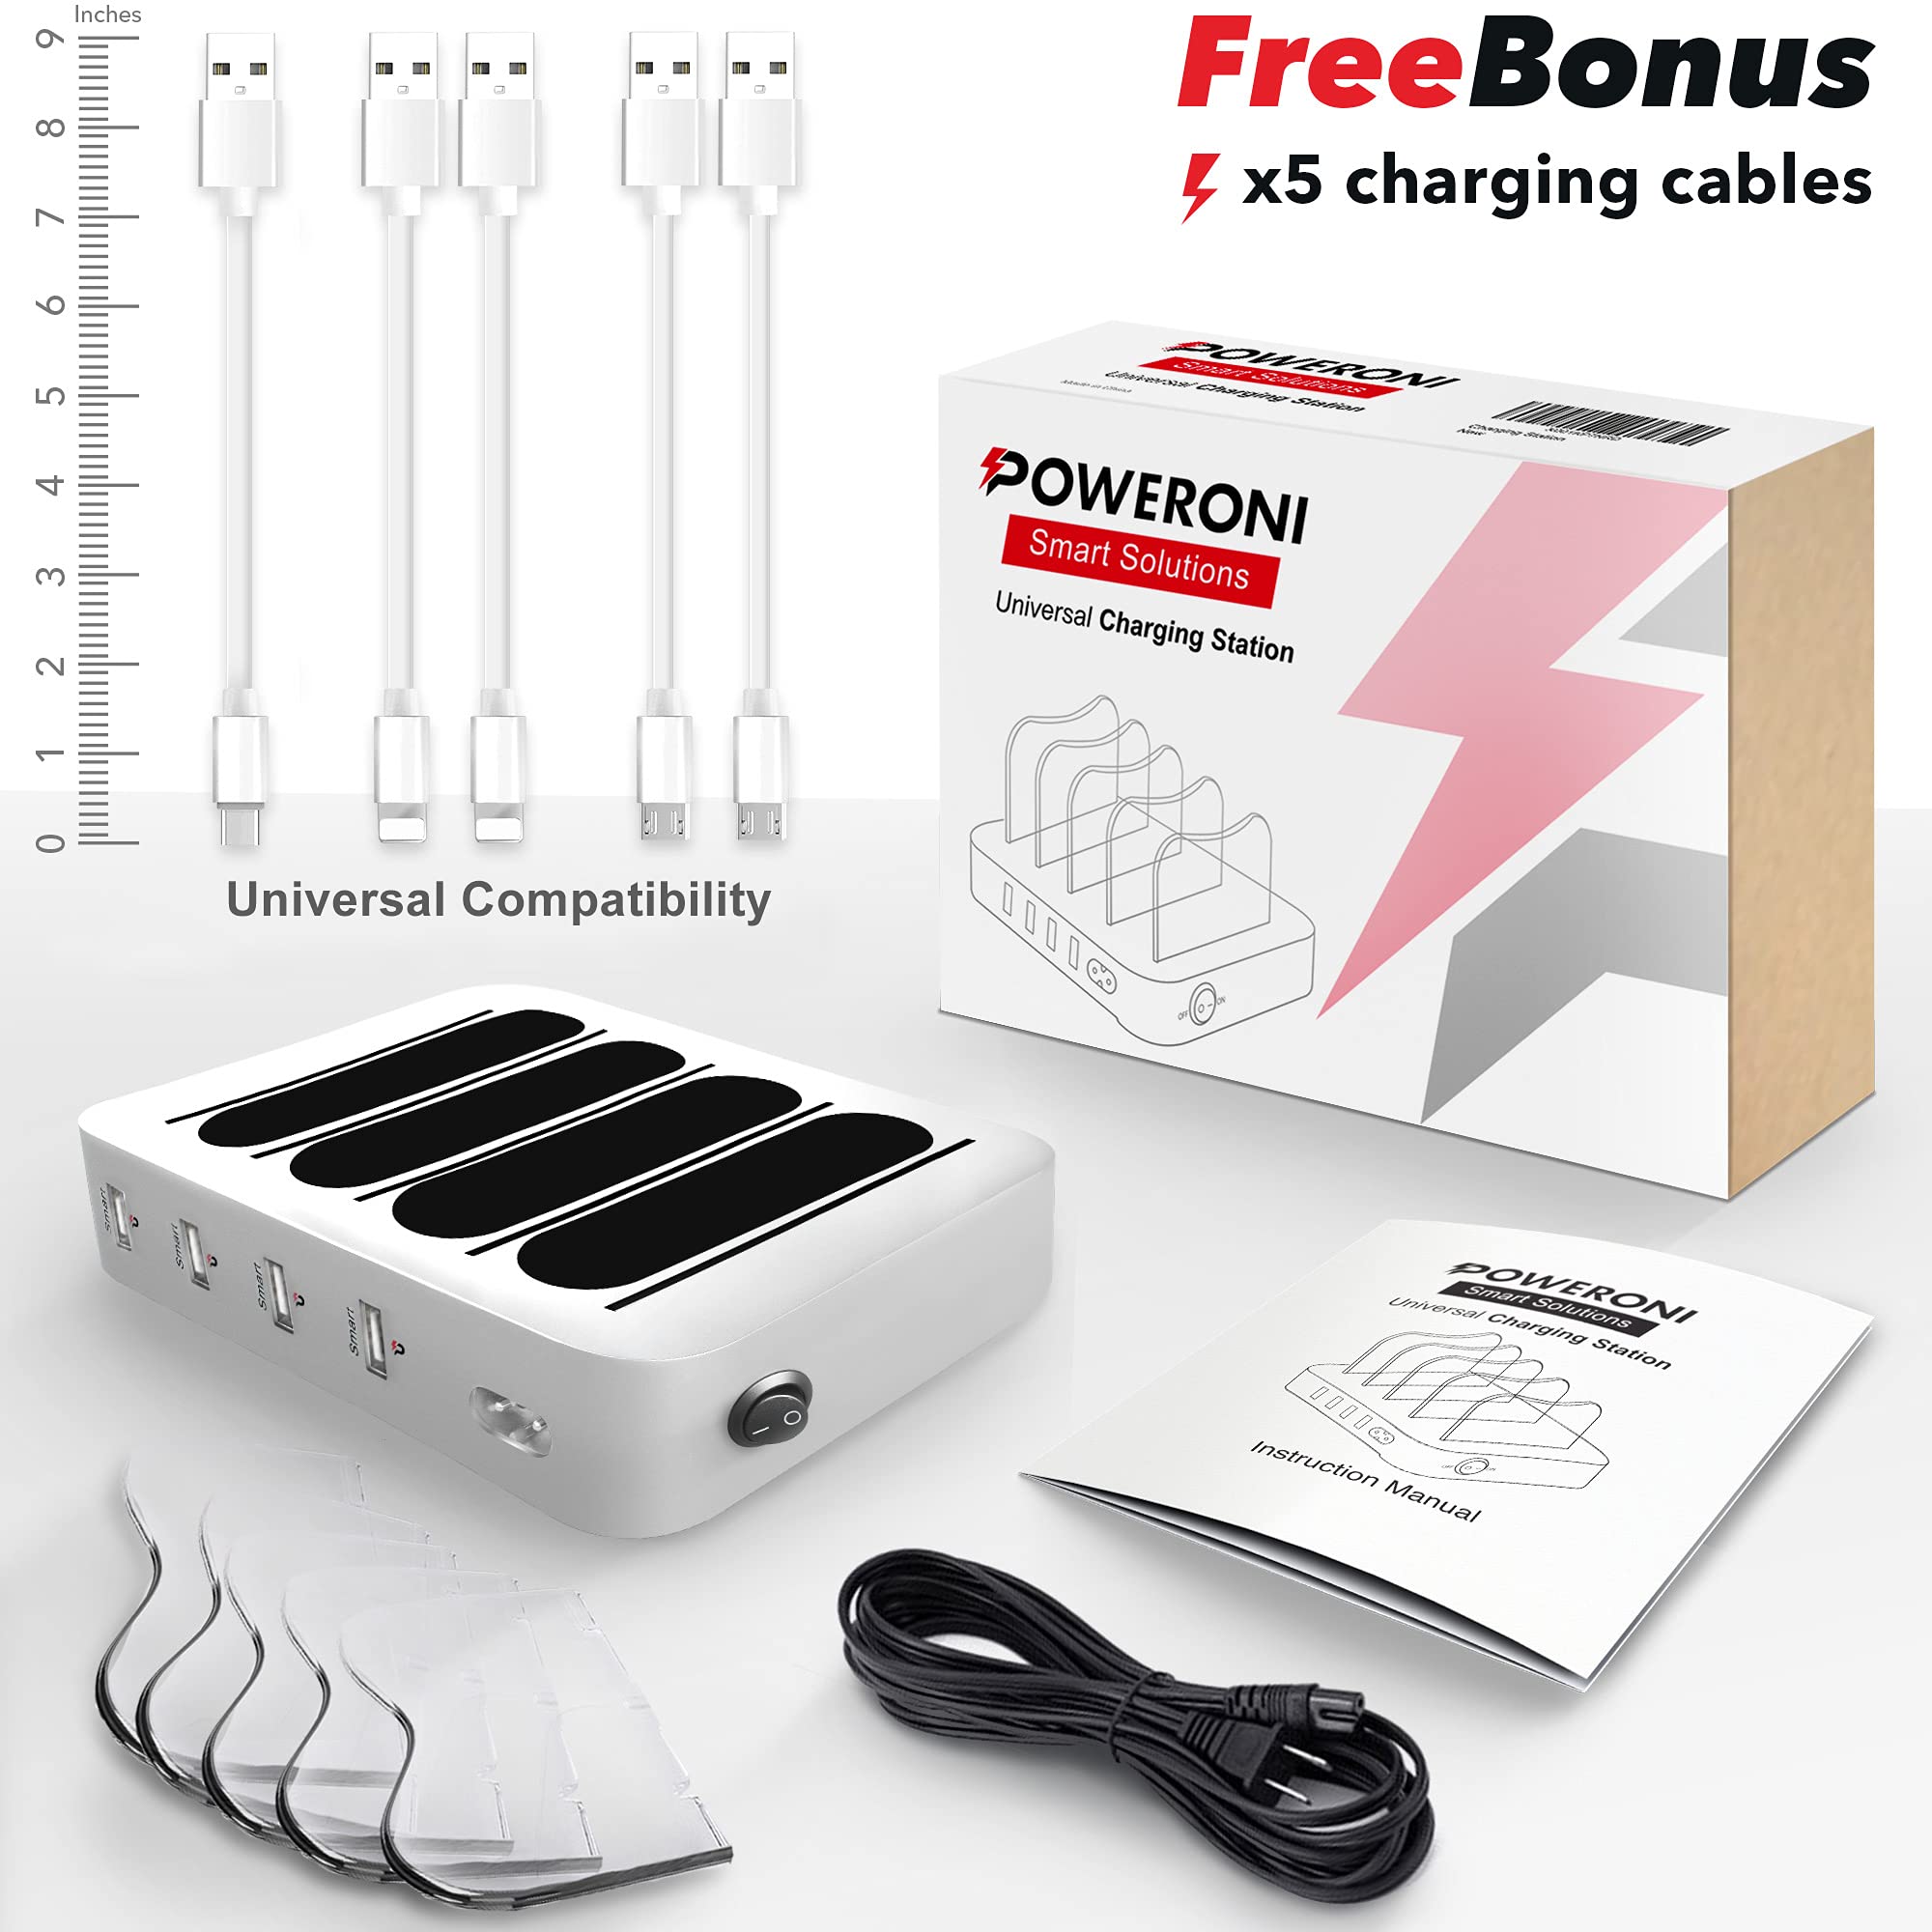 Poweroni USB Charging Dock - 4-Port - Fast Charging Station for Multiple Devices Apple - Multi Device Charger Station - Compatible with Apple iPad iPhone and Android Cell Phone and Tablet  - Good